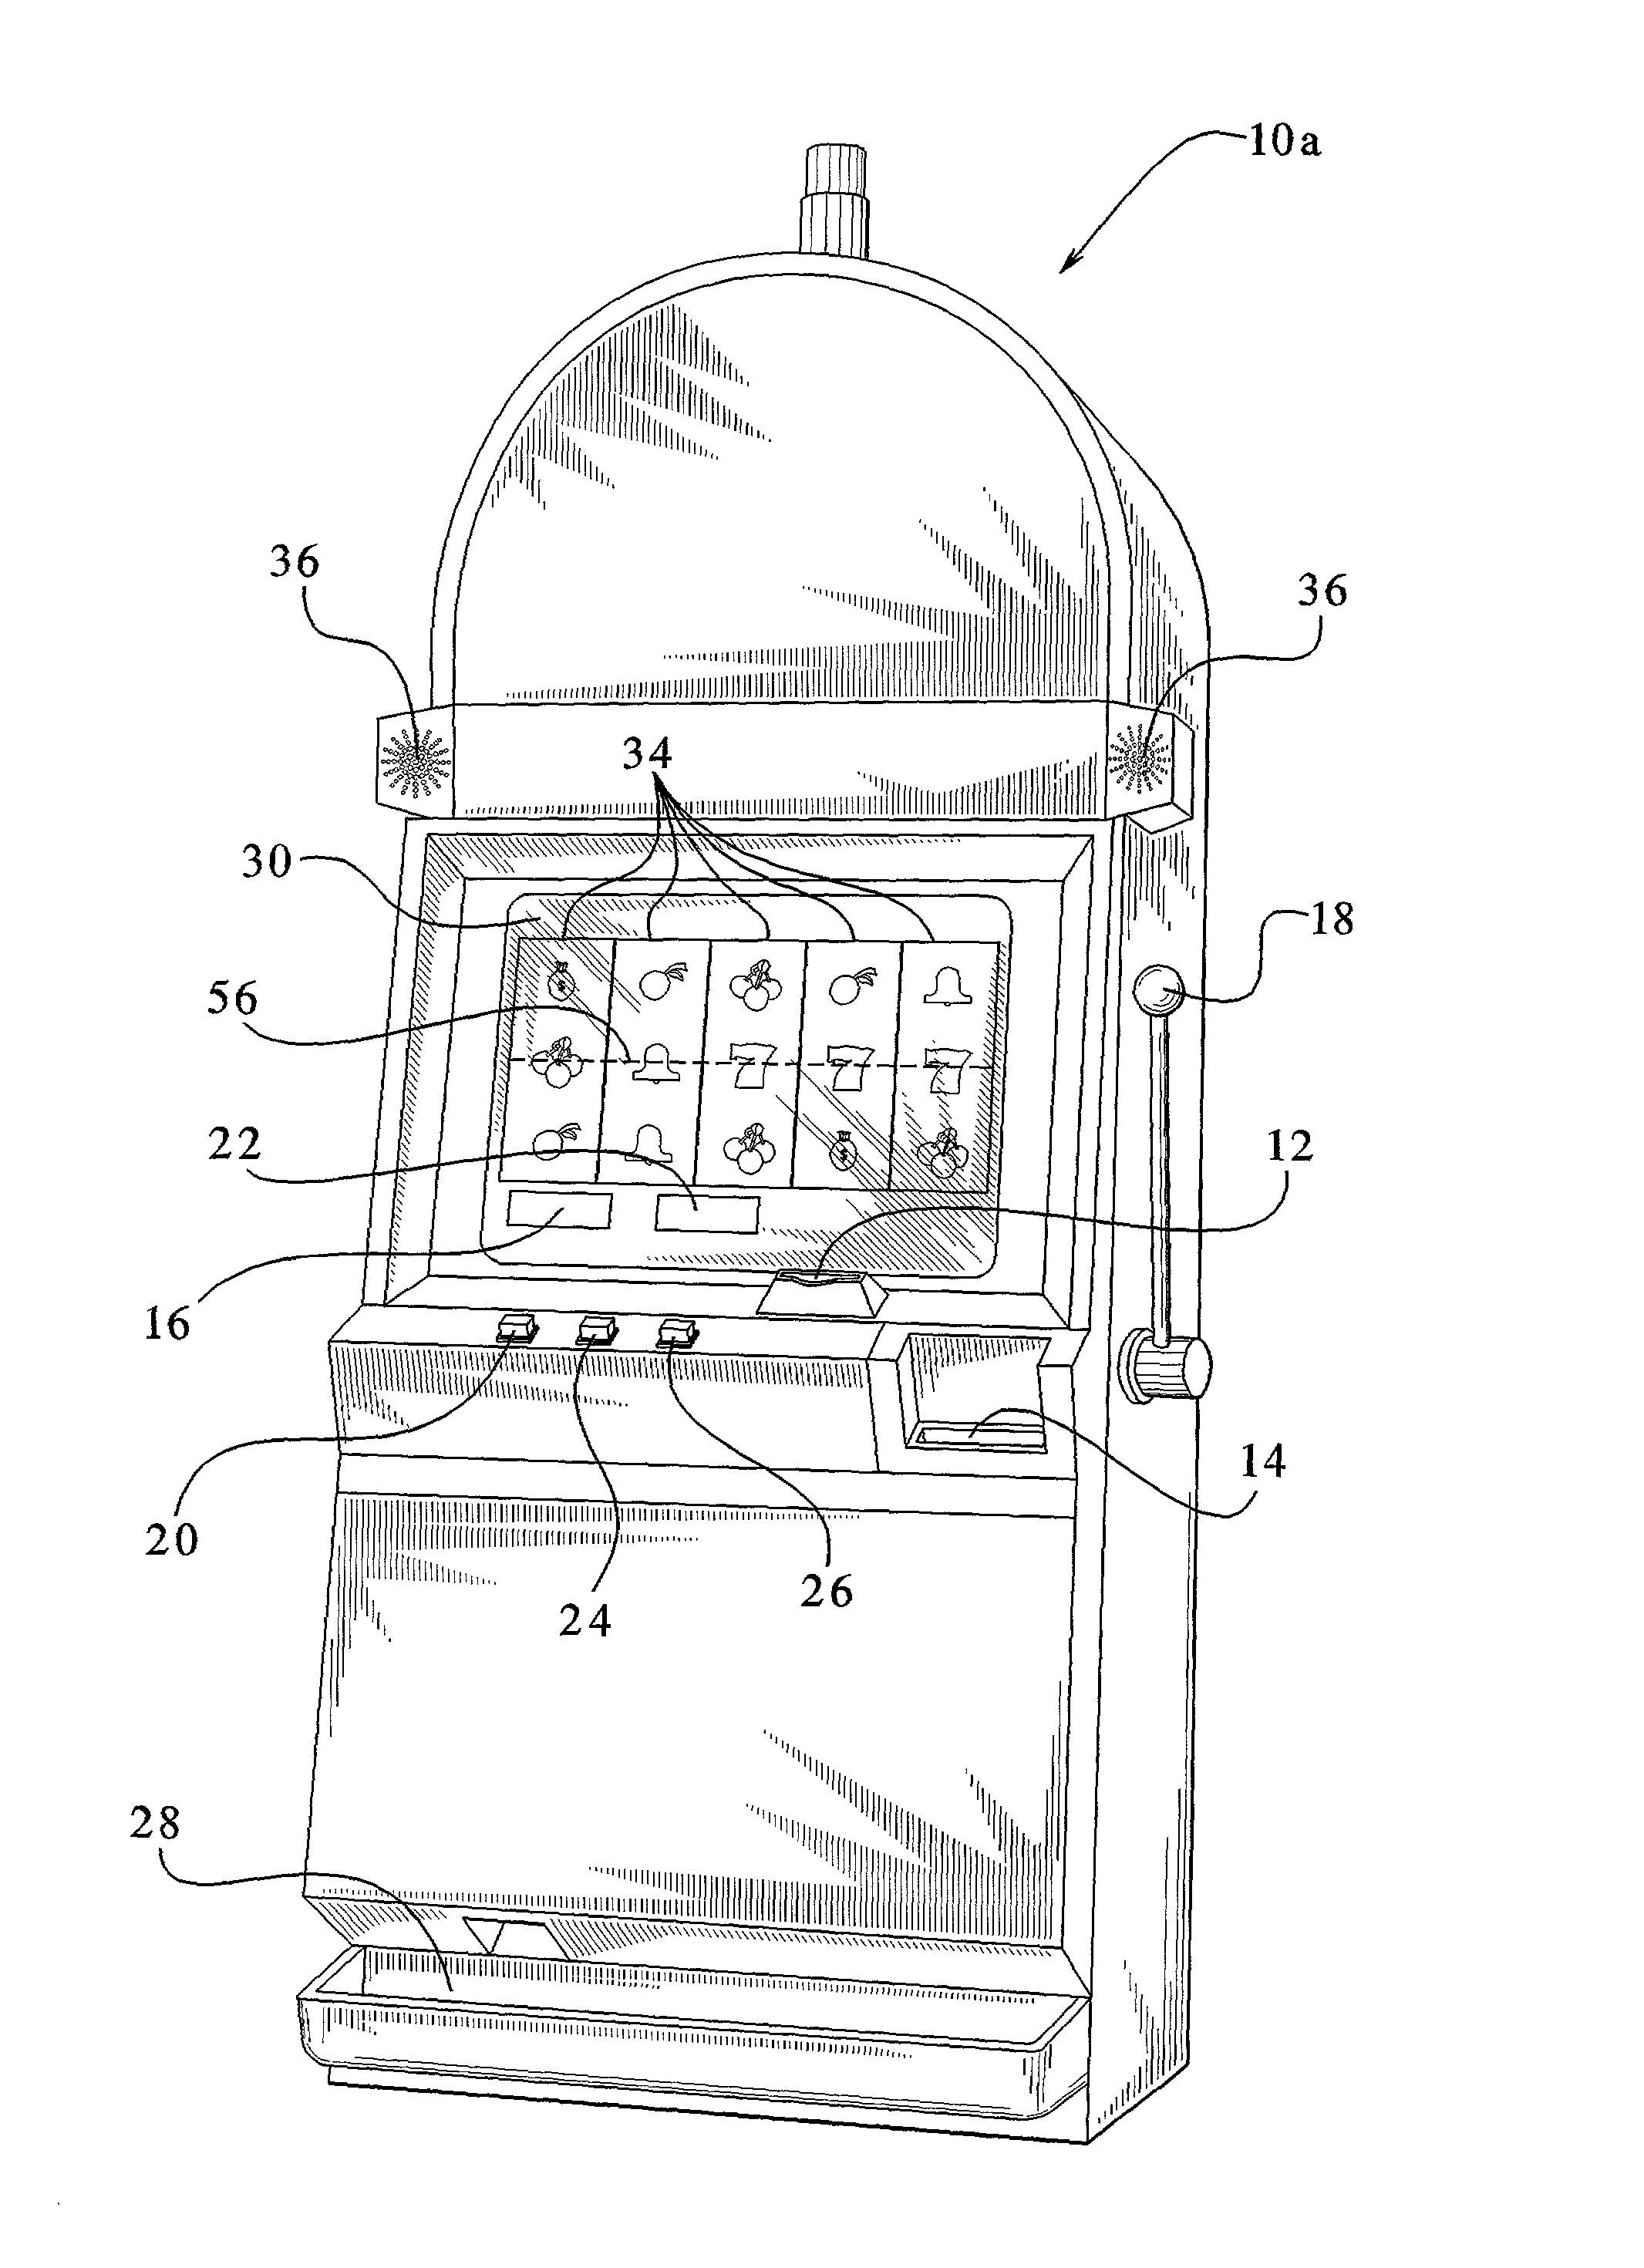 Gaming device having different sets of primary and secondary reel symbols